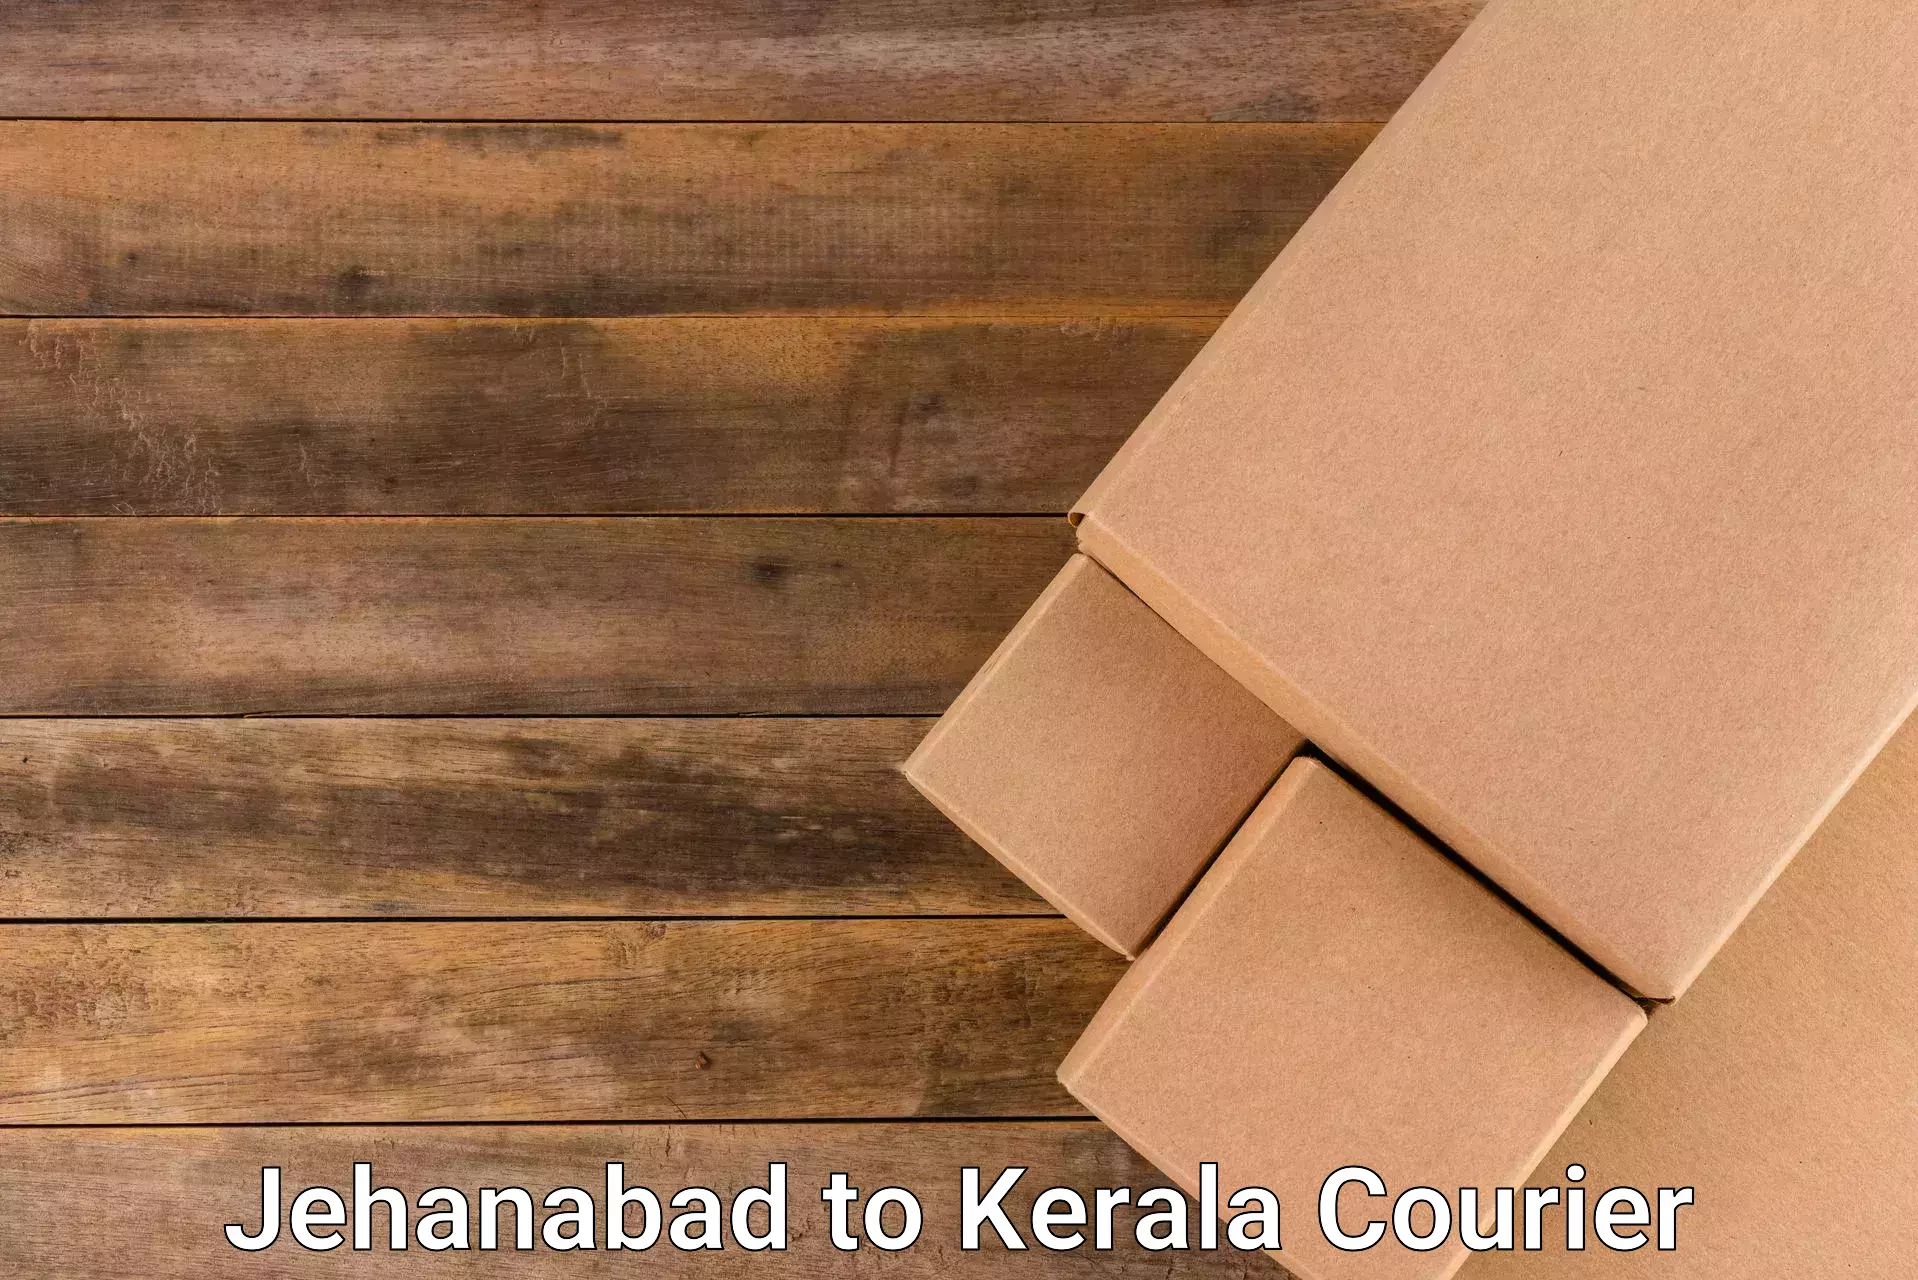 State-of-the-art courier technology Jehanabad to IIT Palakkad